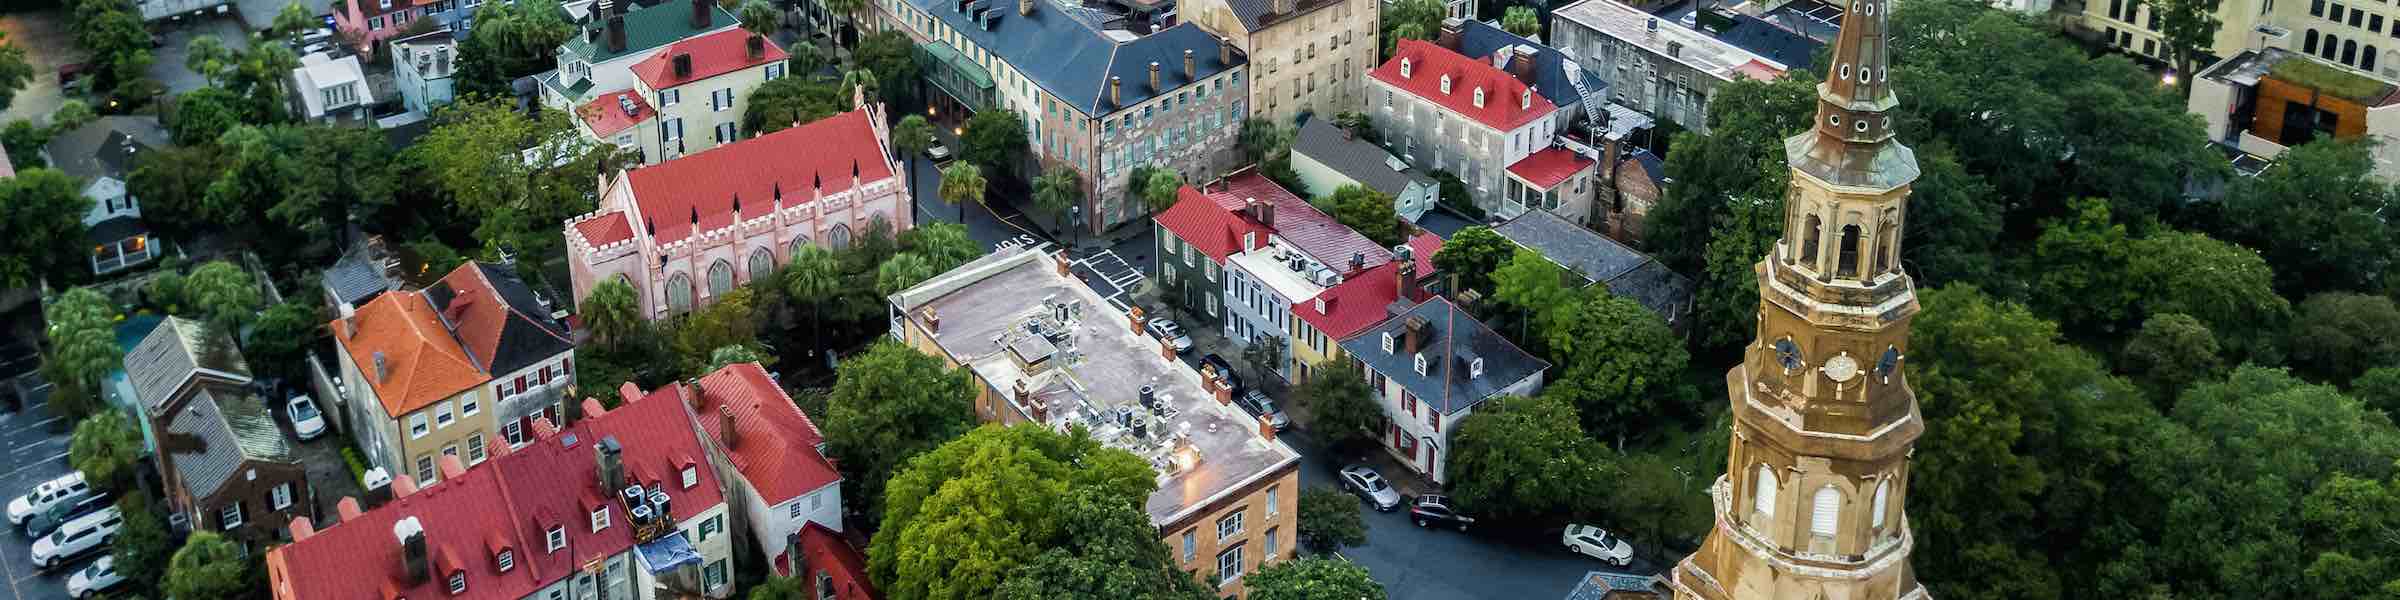 Aerial view of the French Quarter and Historic District at Charleston, SC.